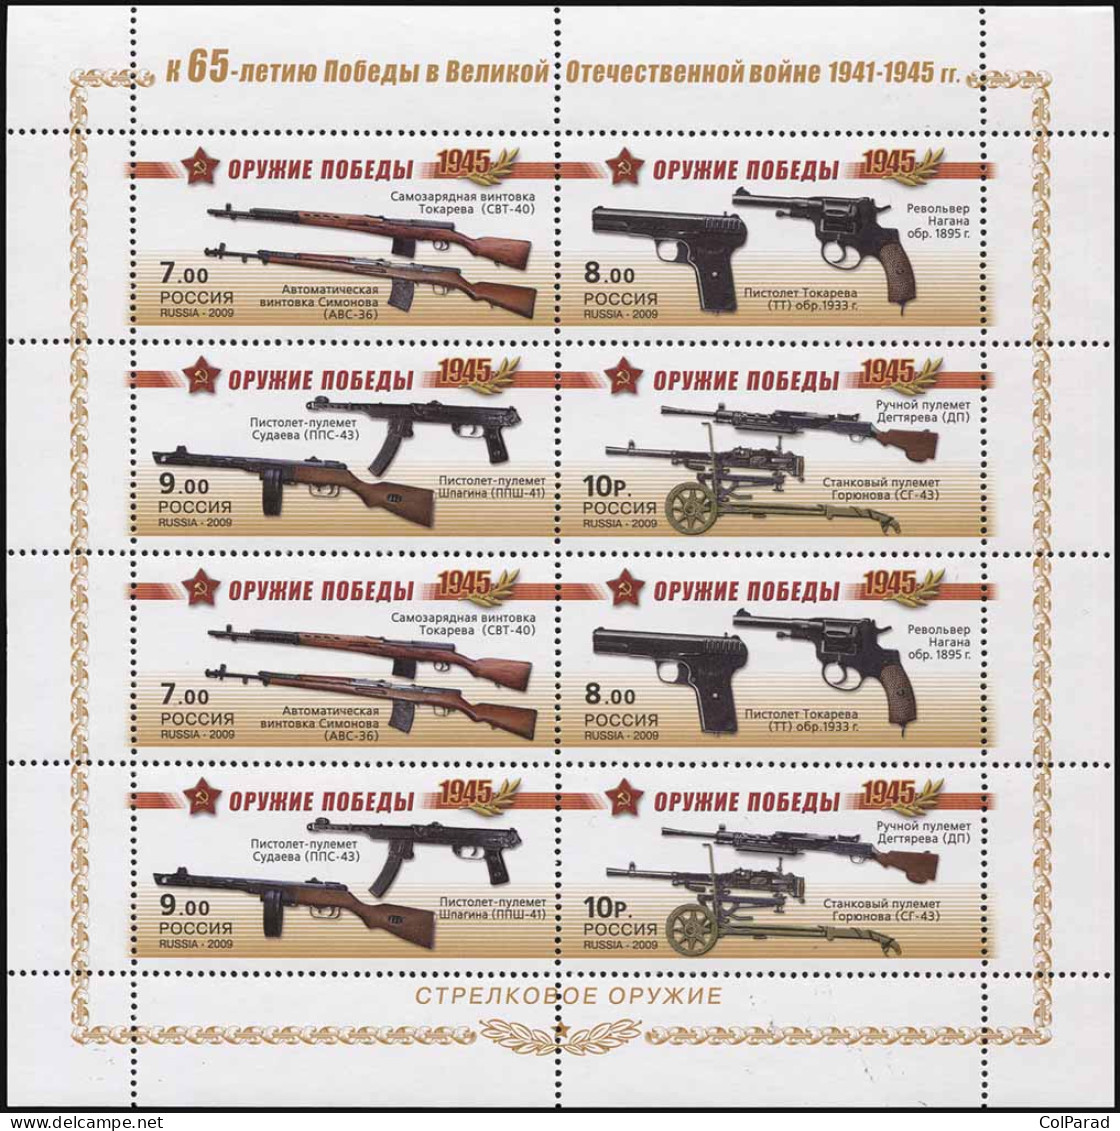 RUSSIA - 2009 - MINIATURE SHEET MNH ** - Victory Weapons. Small Arms - Nuovi